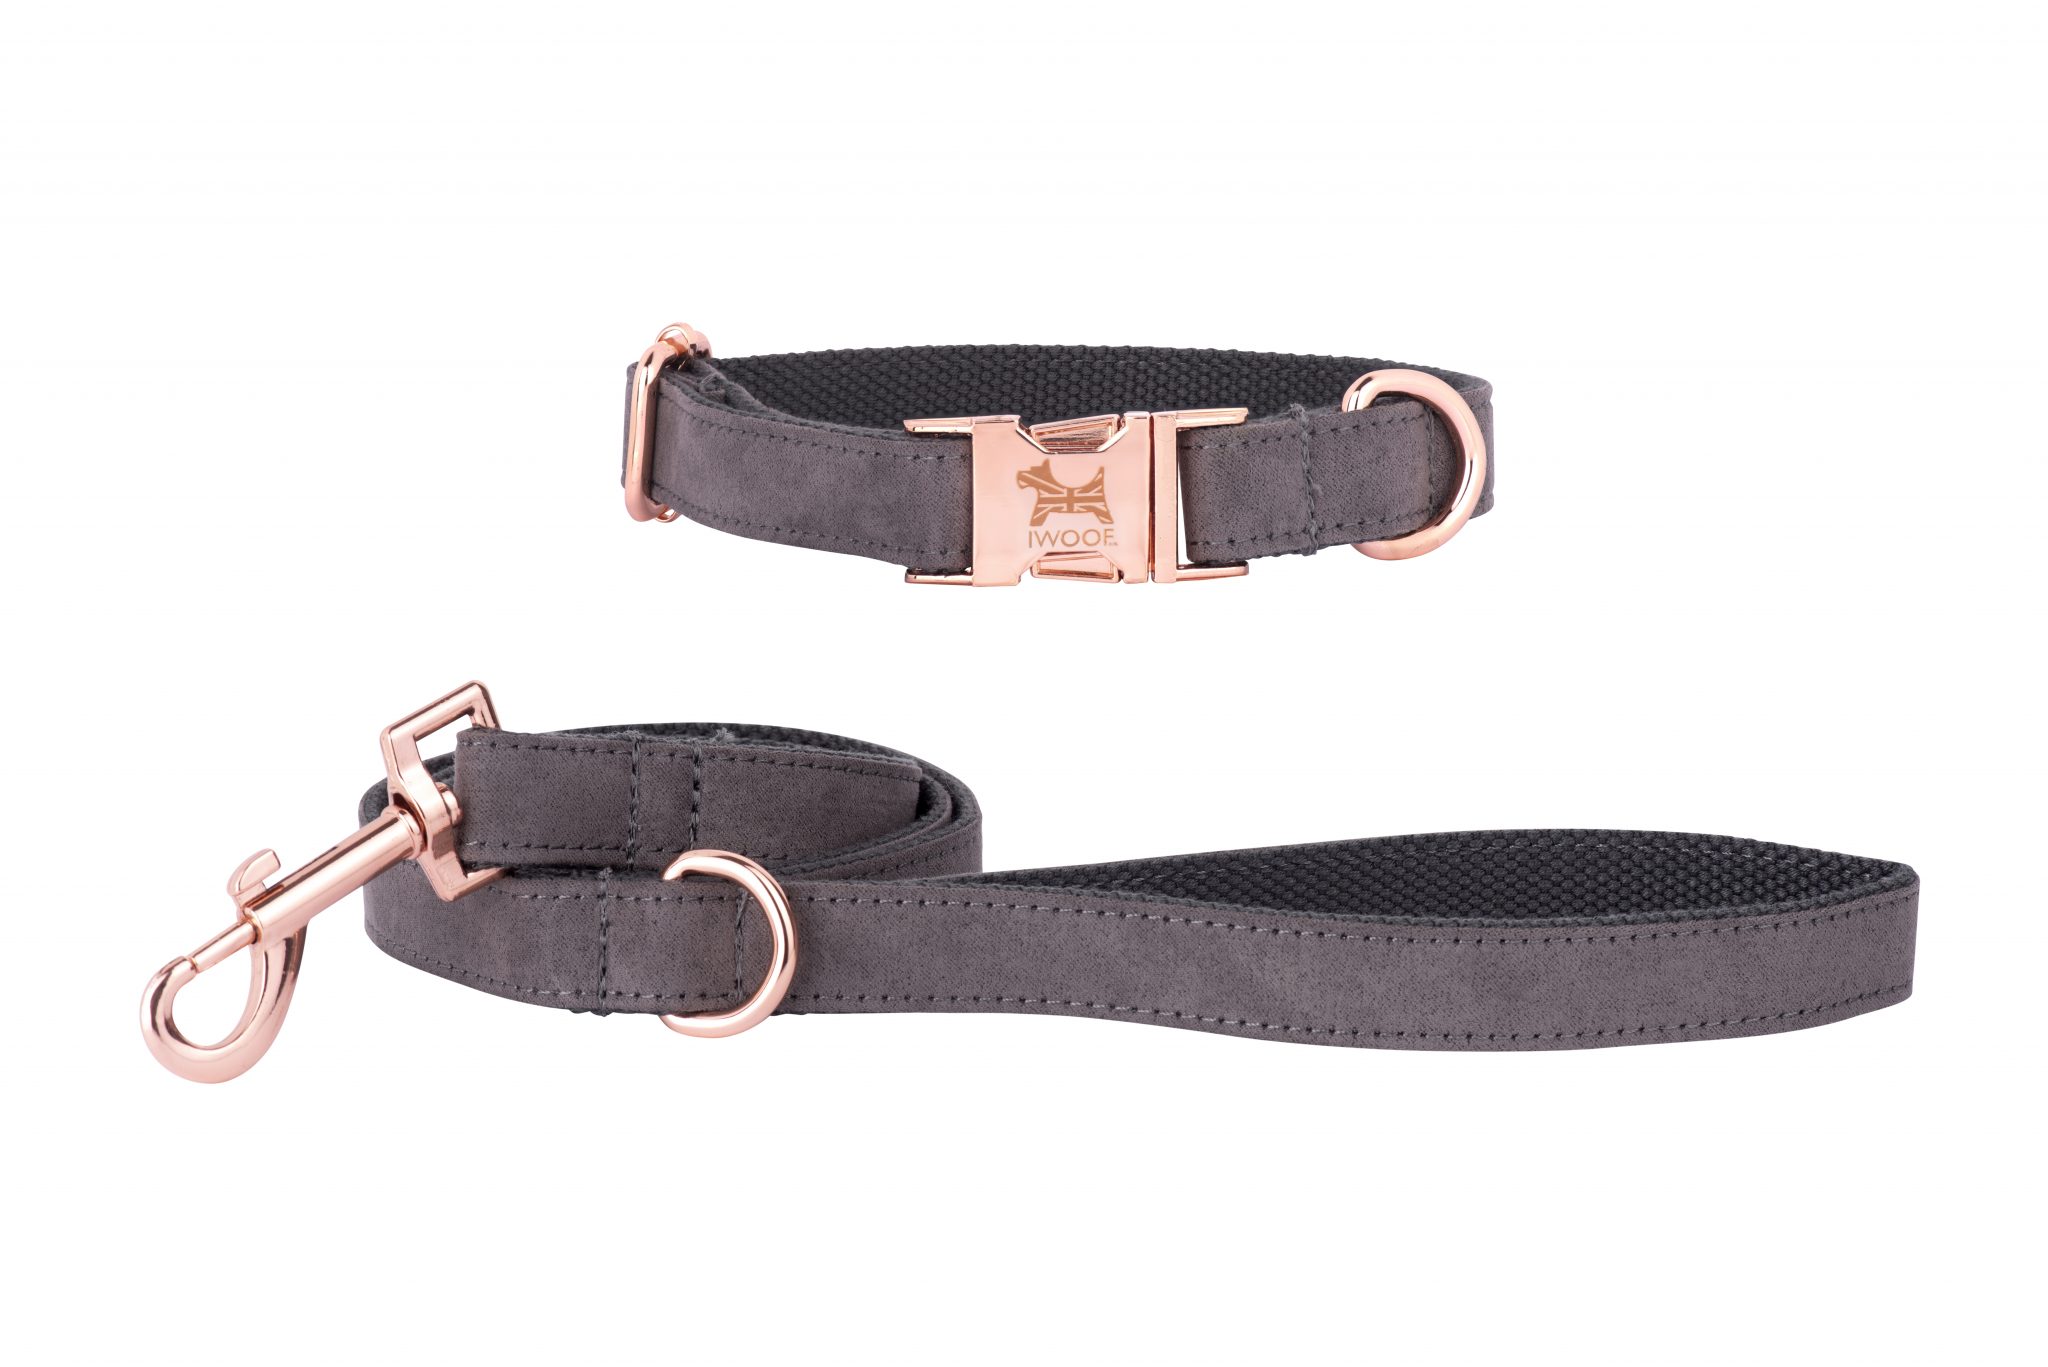 Dolphin designer dog collar and lead with British flag in rose gold by IWOOF